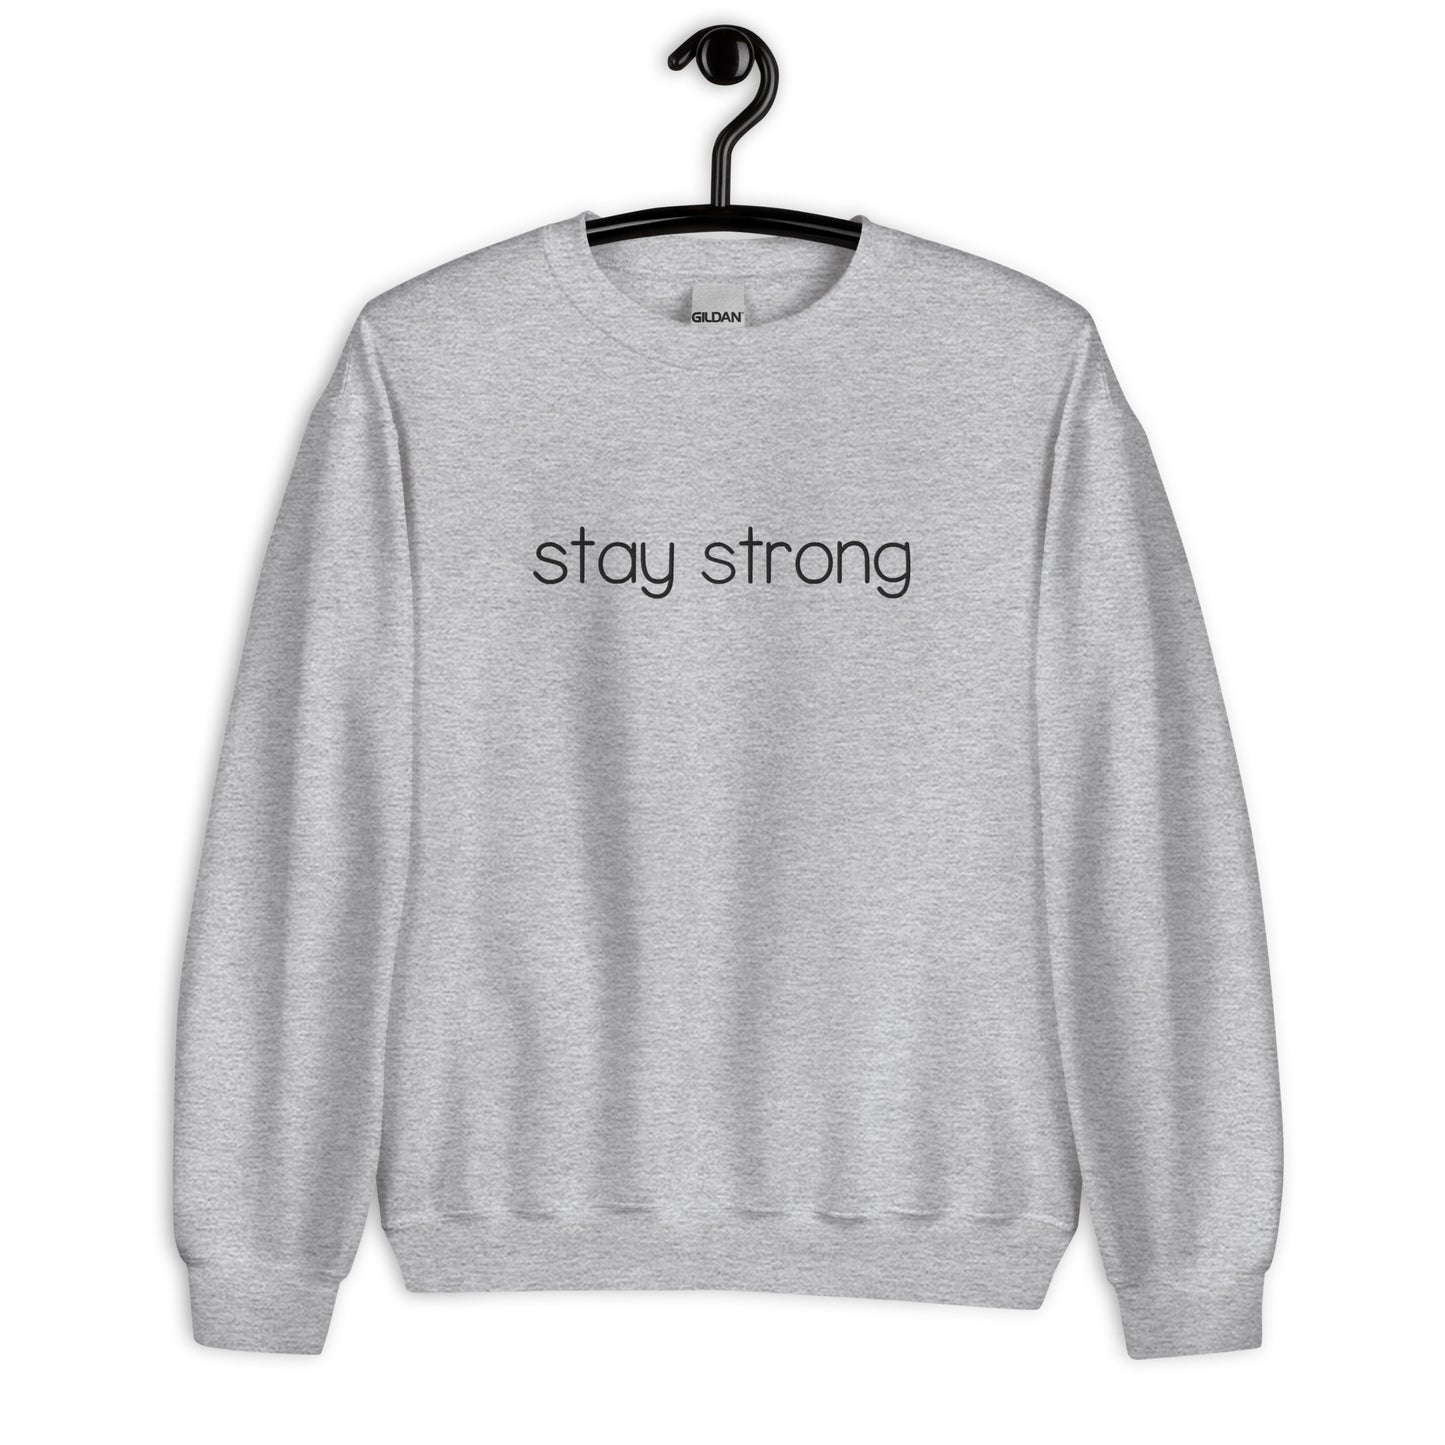 Stay Strong Embroidered Sweatshirt